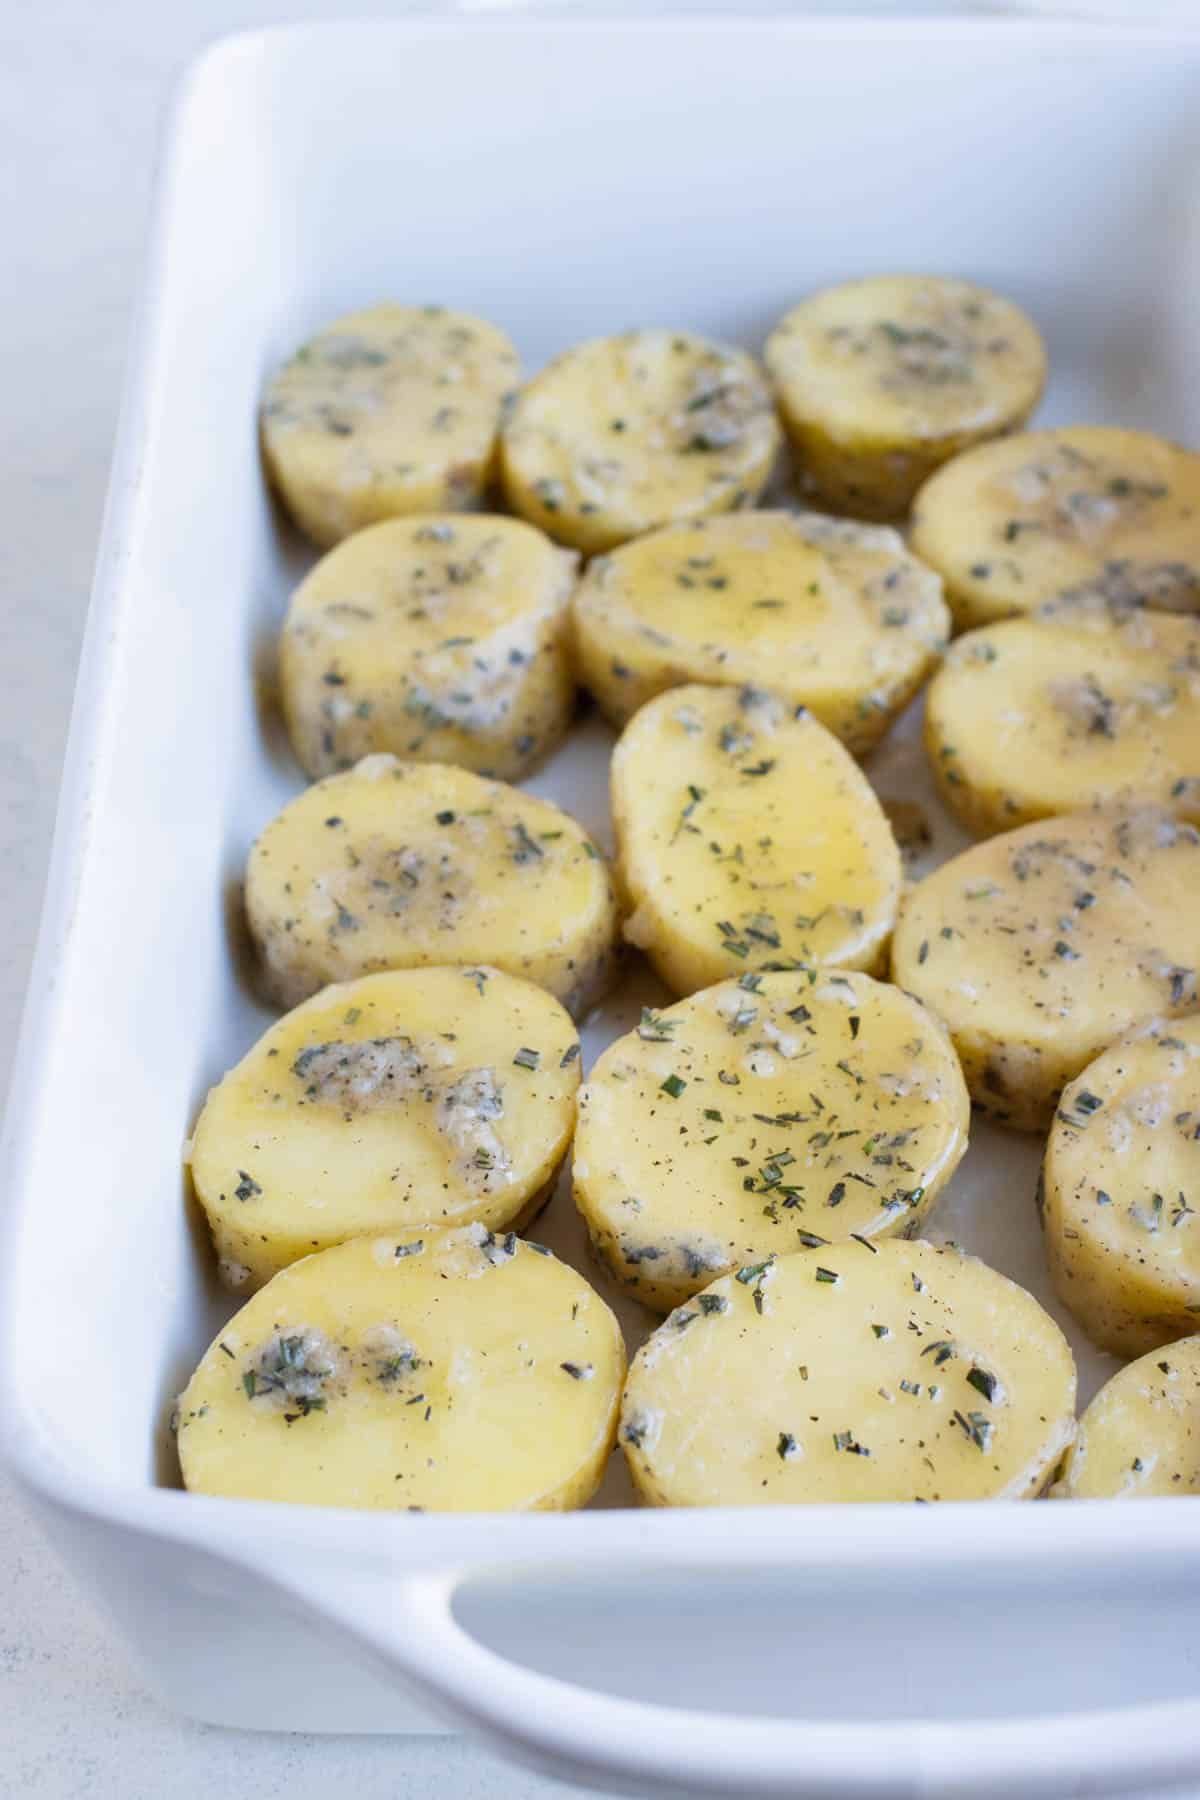 Sauced potatoes are spread in a baking dish.